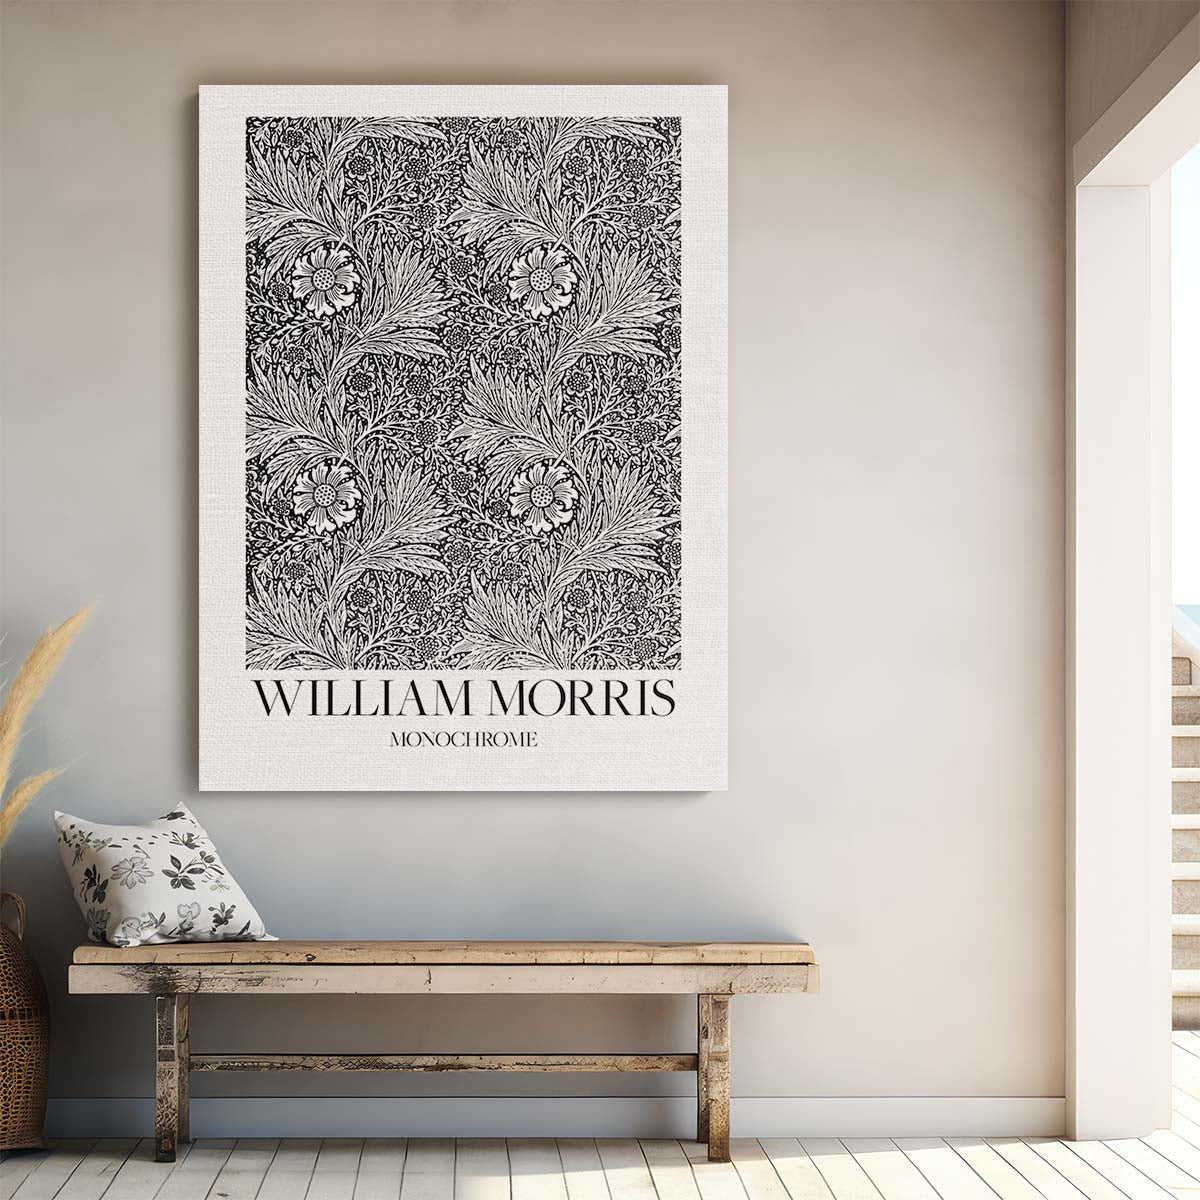 William Morris Marigold Monochrome Illustration, Vintage Floral Typography Poster by Luxuriance Designs, made in USA